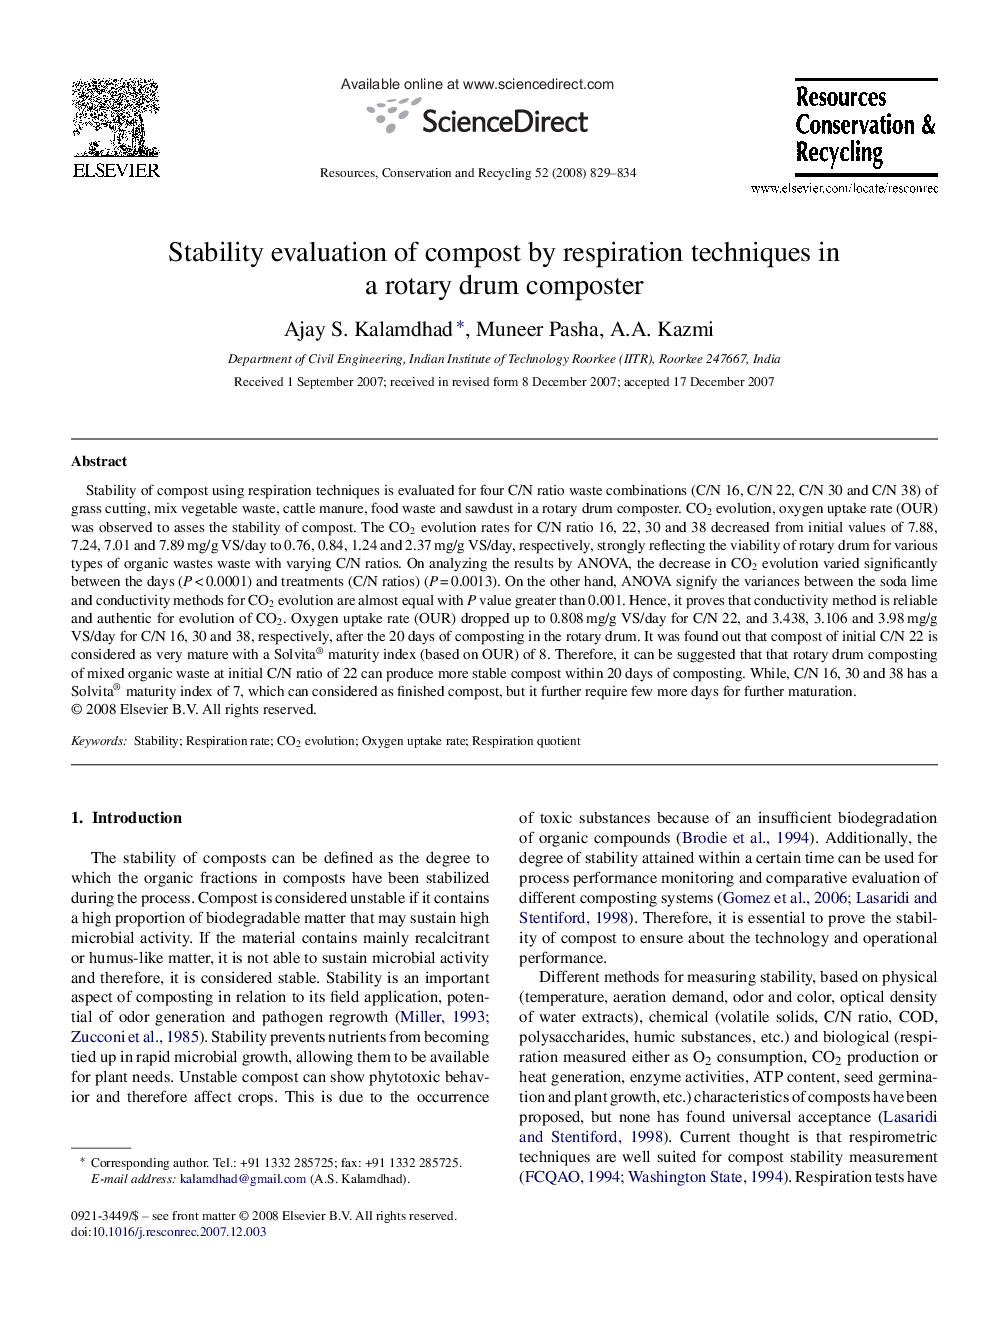 Stability evaluation of compost by respiration techniques in a rotary drum composter